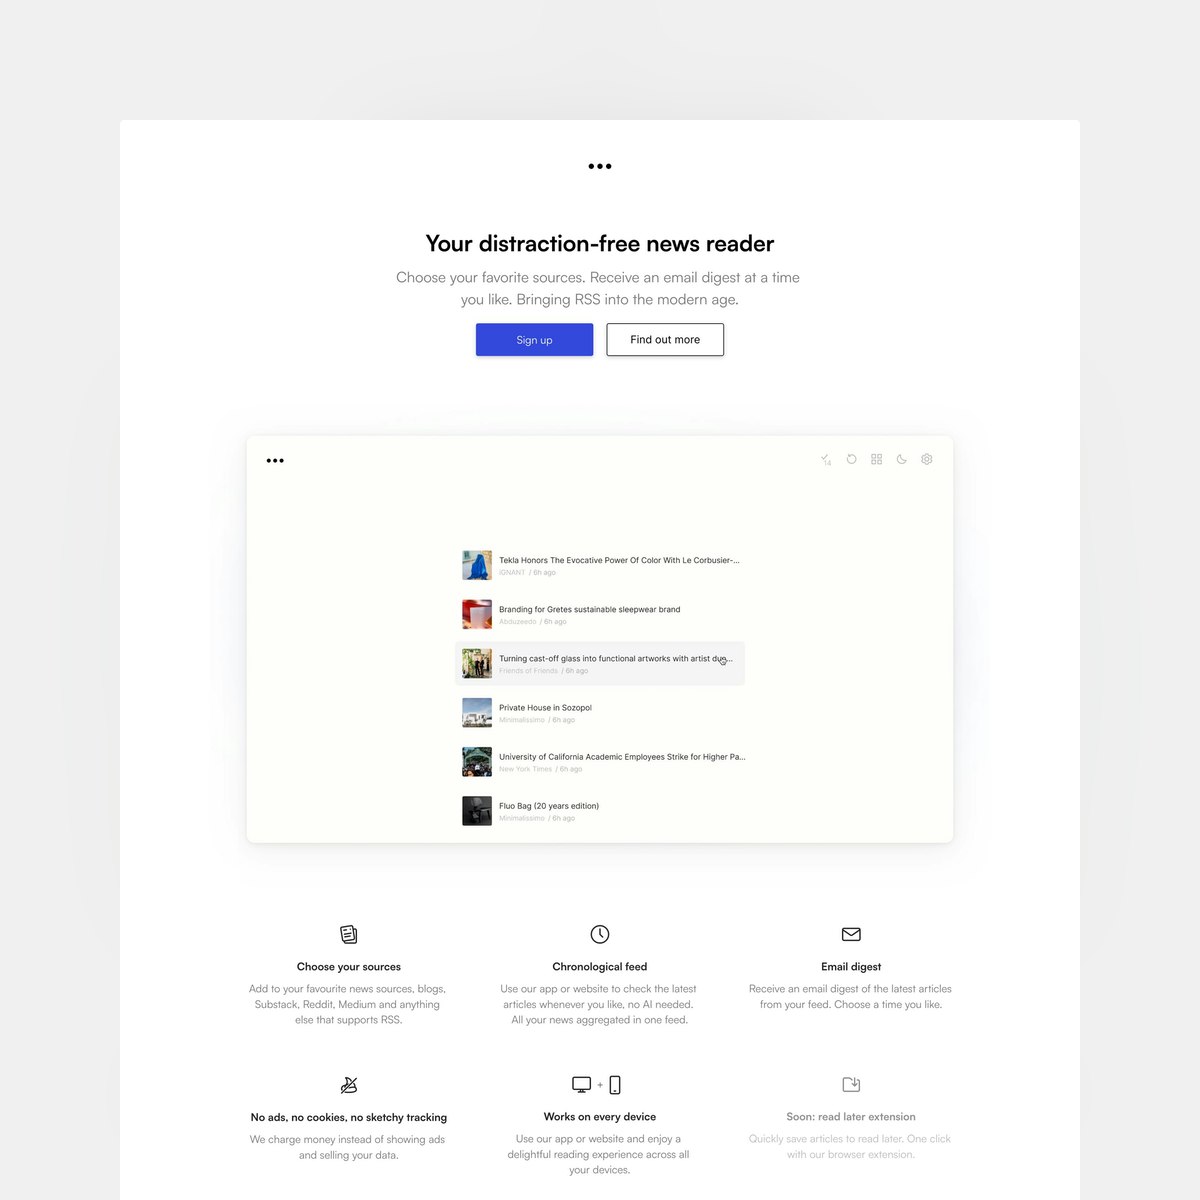 Product Page screen design idea #312: Website Inspiration: Sortable